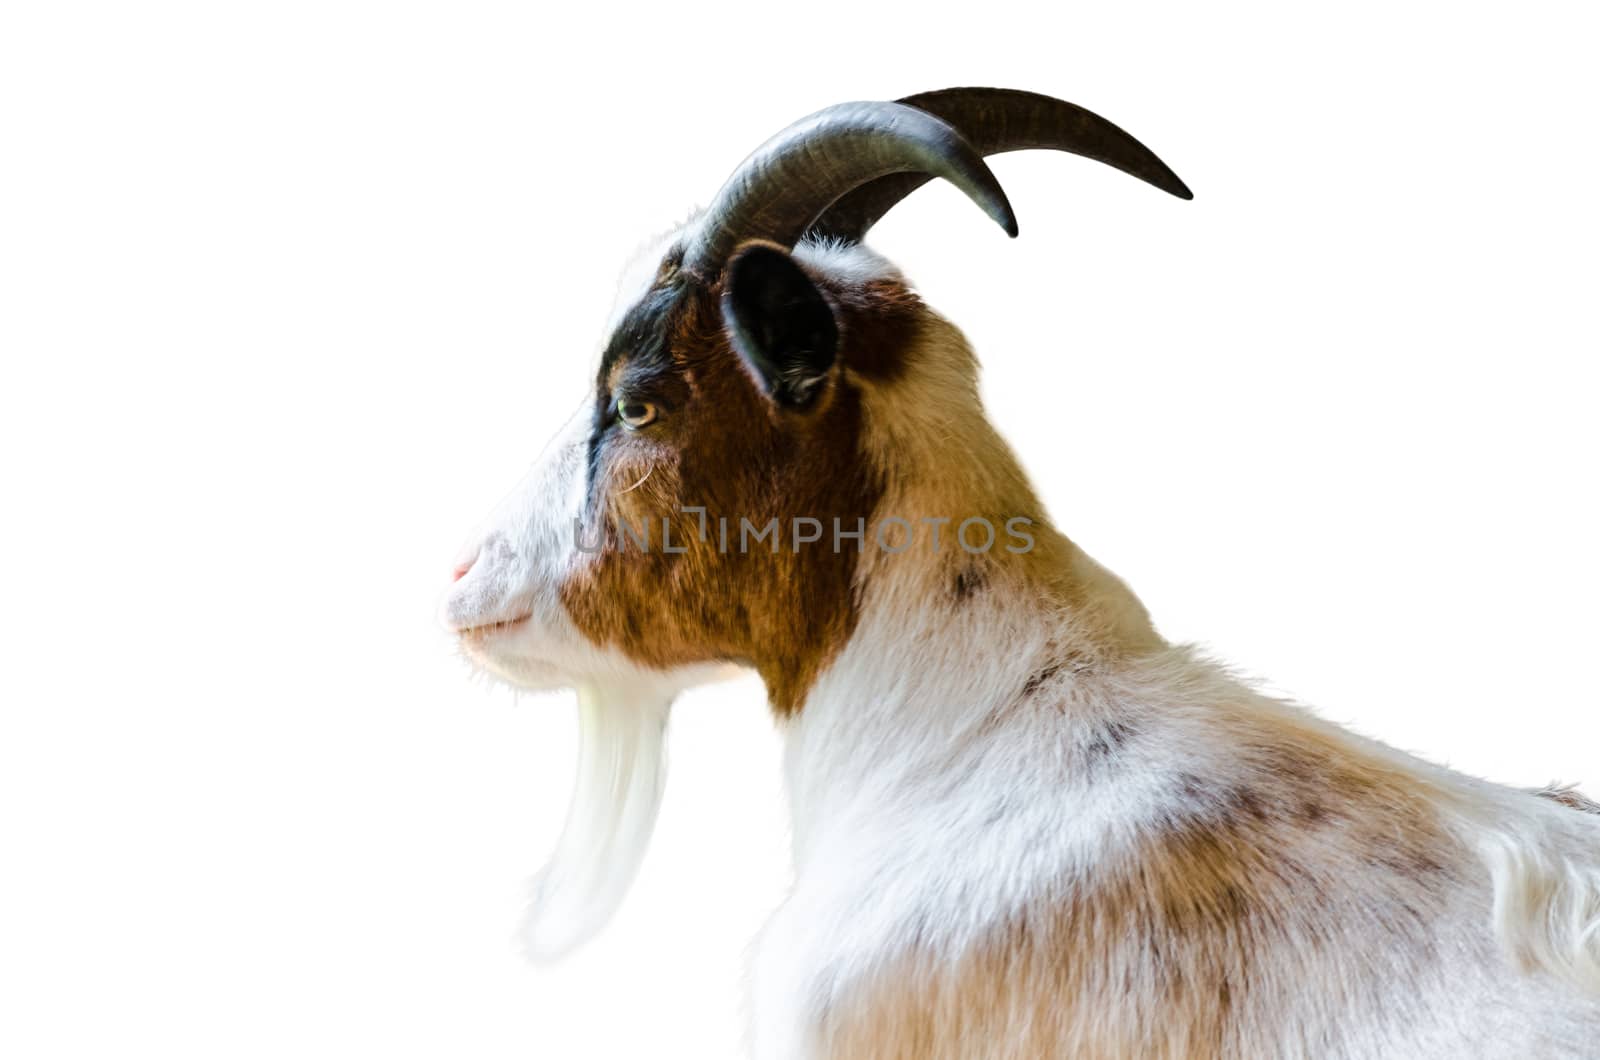 Head of a goat in front of a white background.